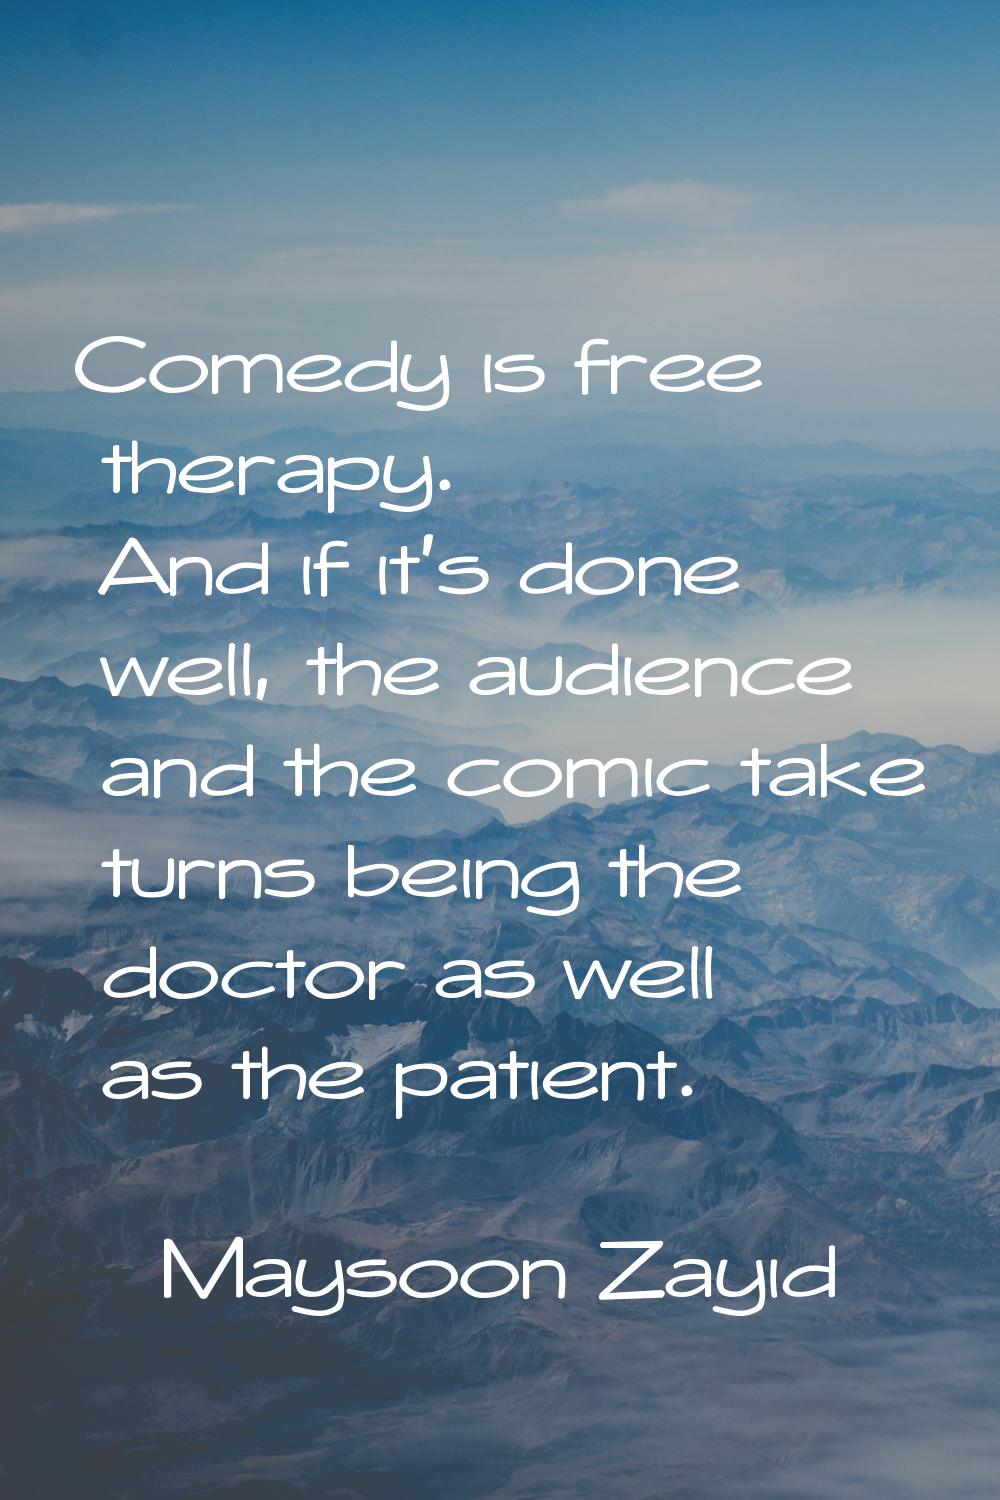 Comedy is free therapy. And if it's done well, the audience and the comic take turns being the doct